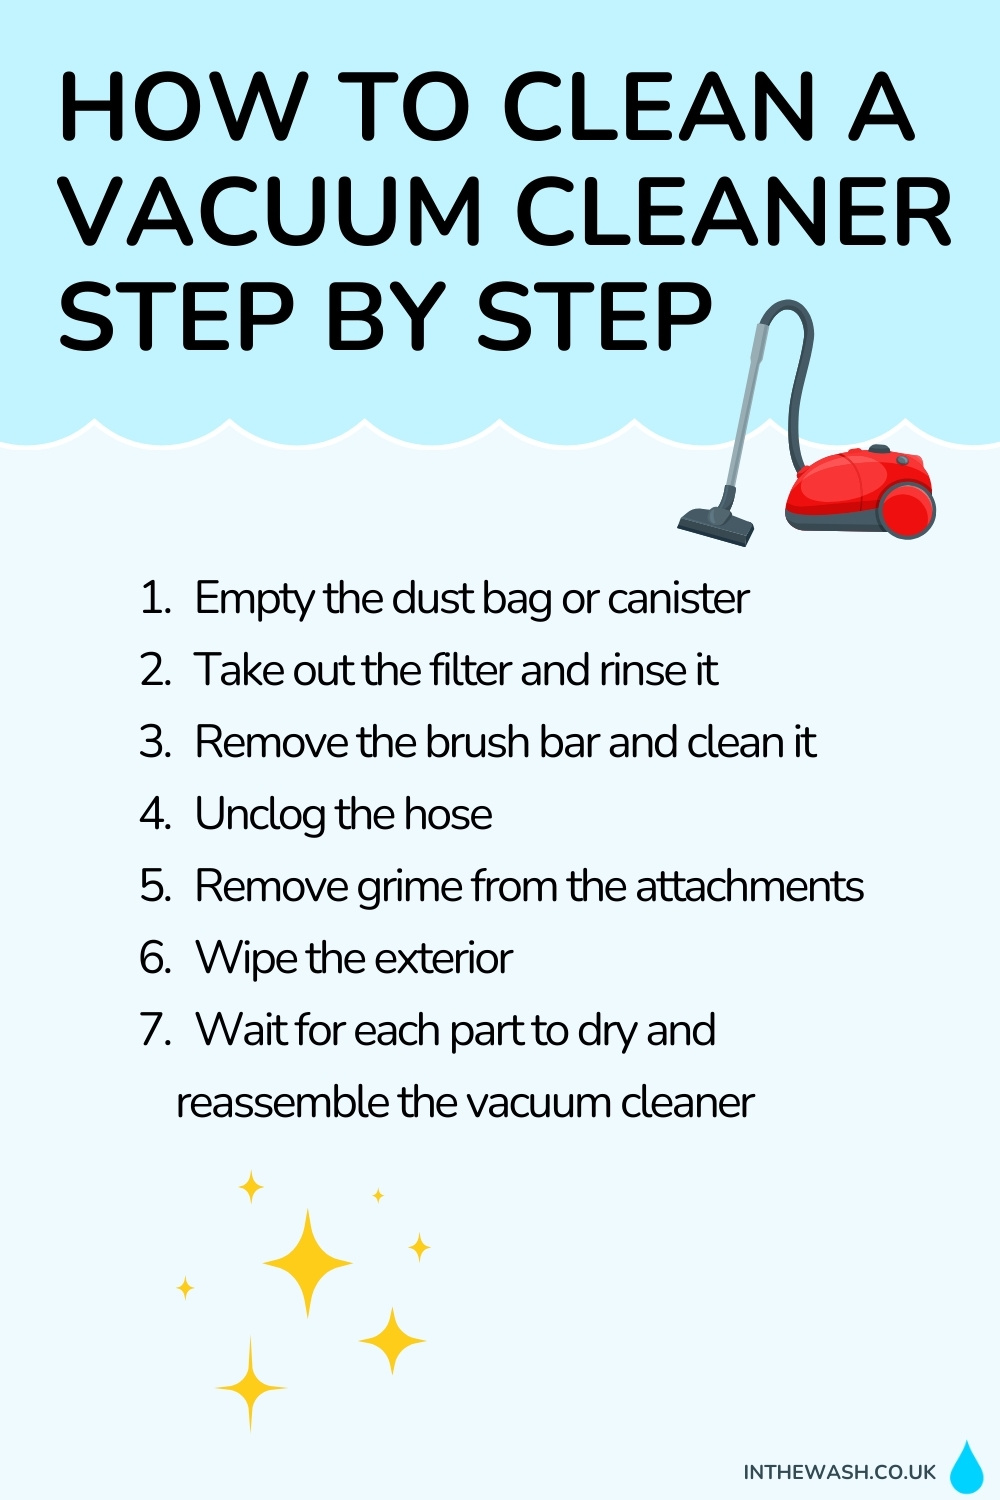 How to clean a vacuum cleaner step by step